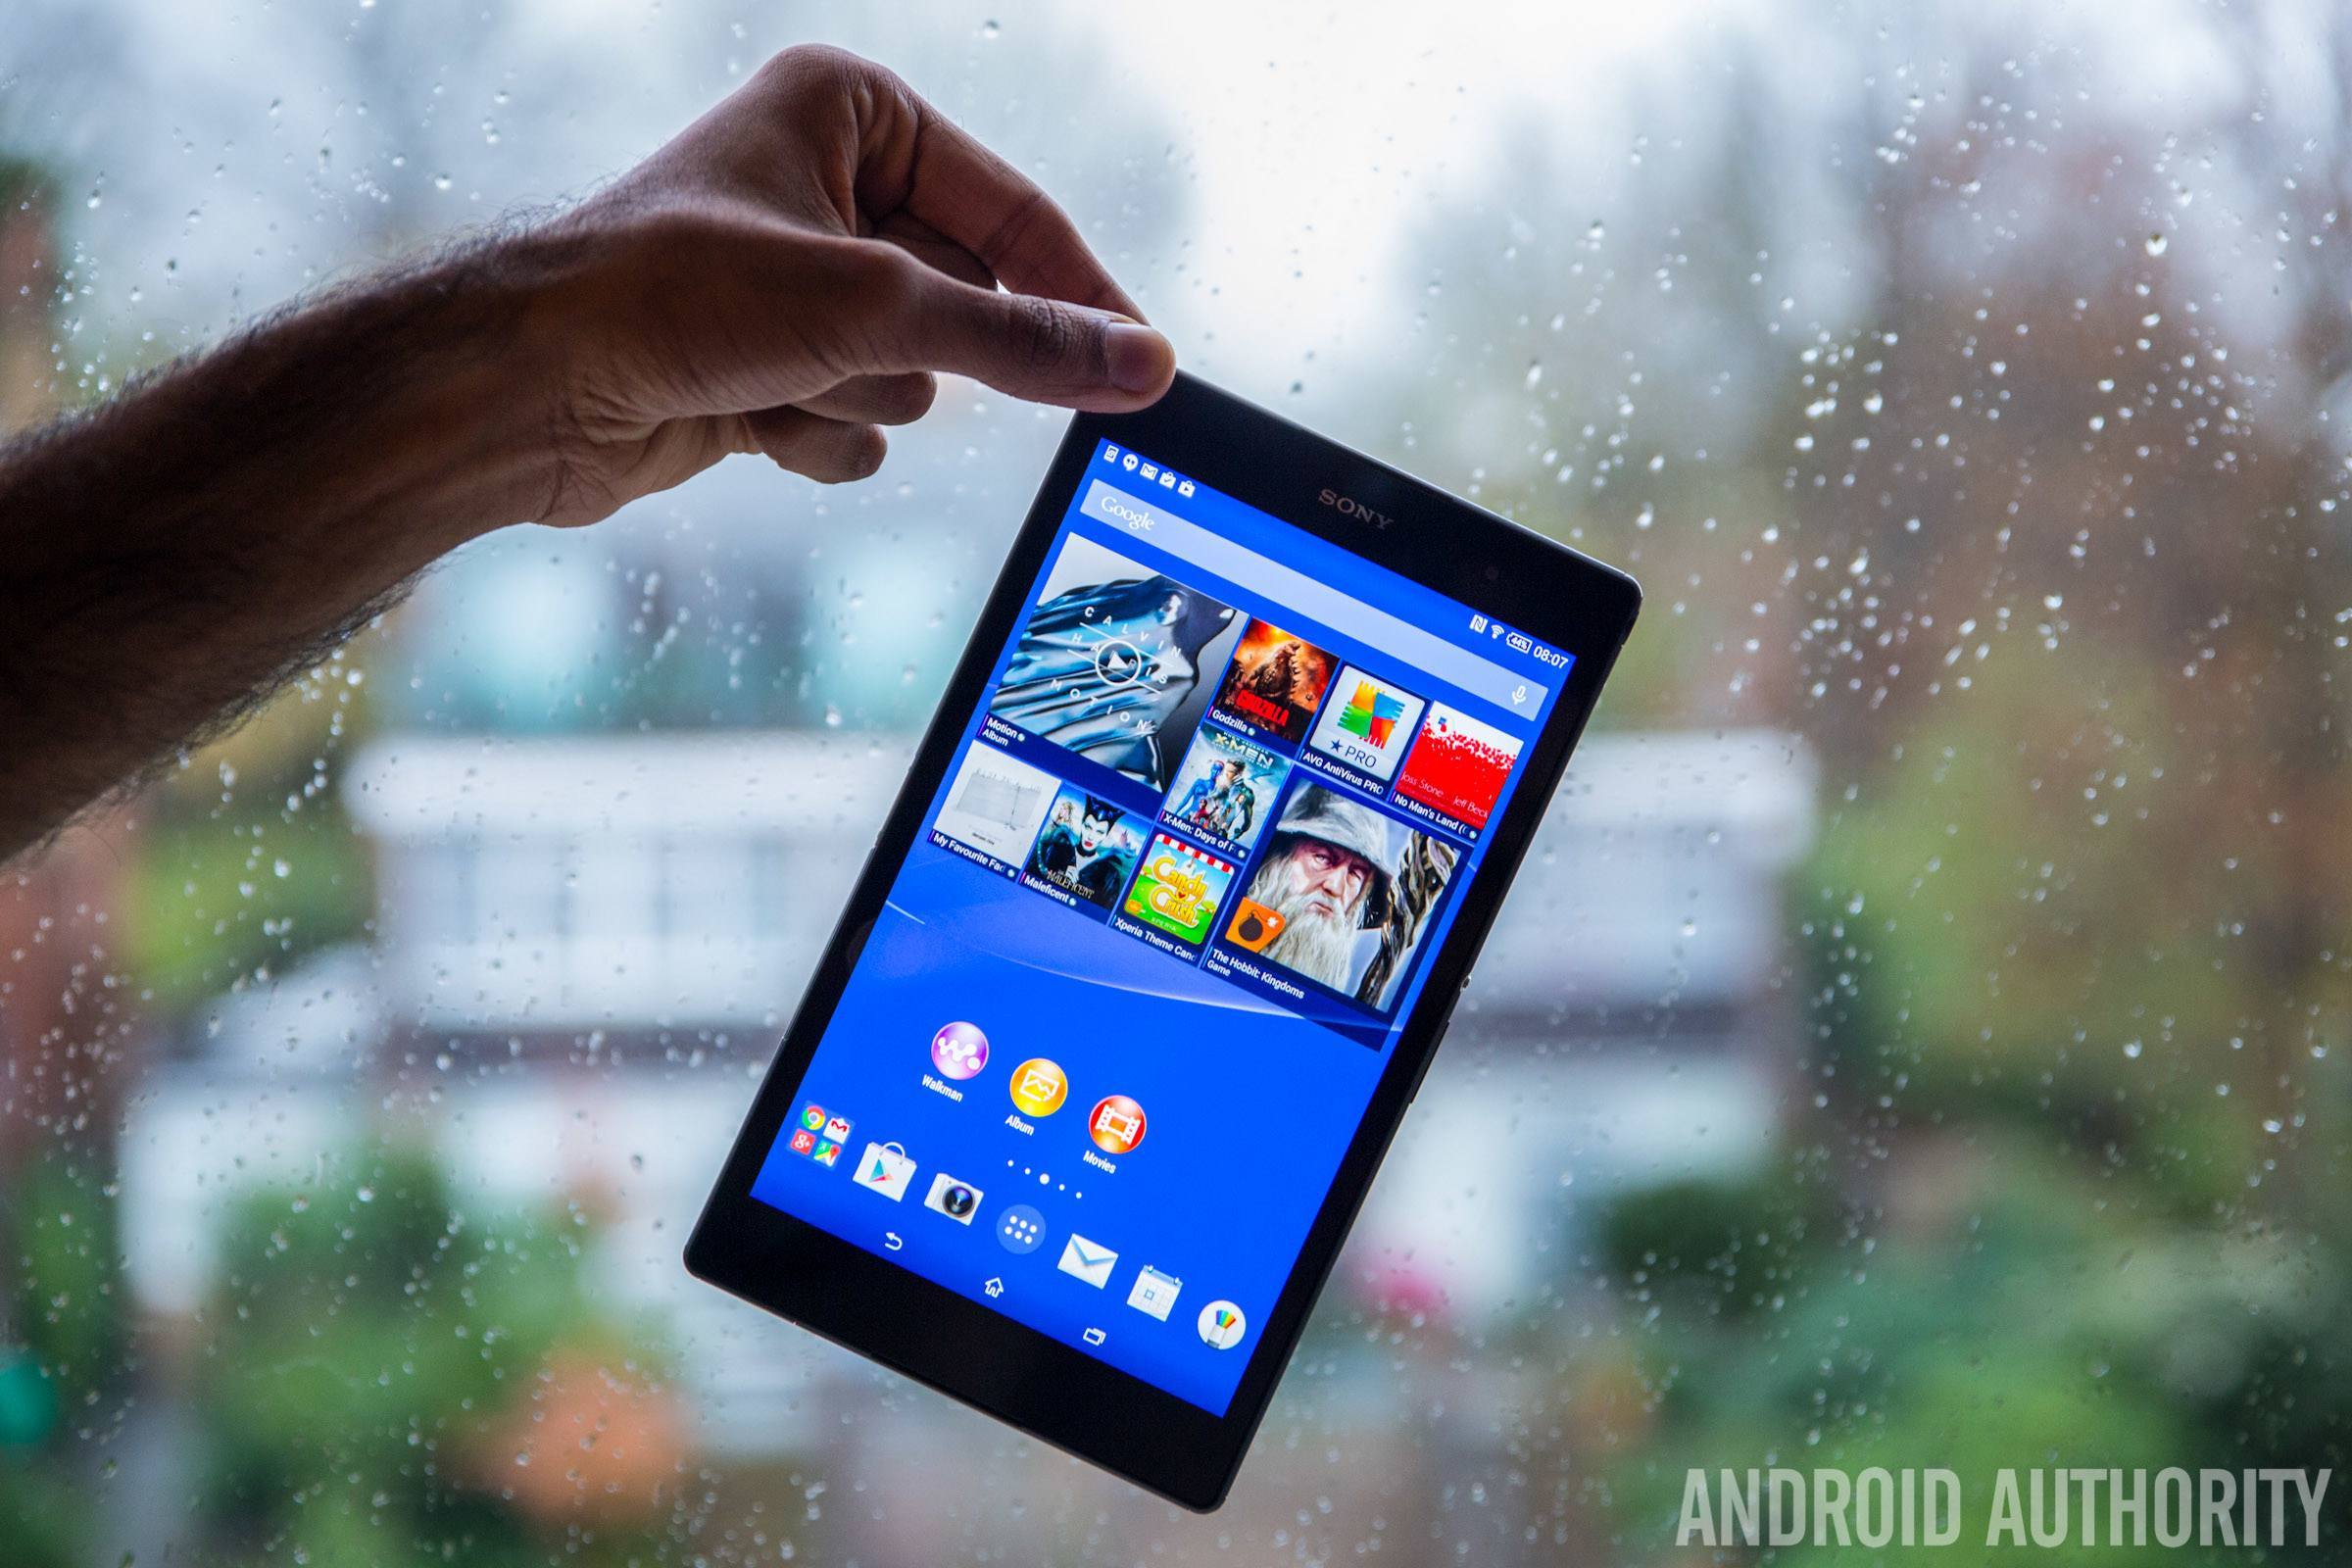 Xperia z3 tablet compact(wifi only)